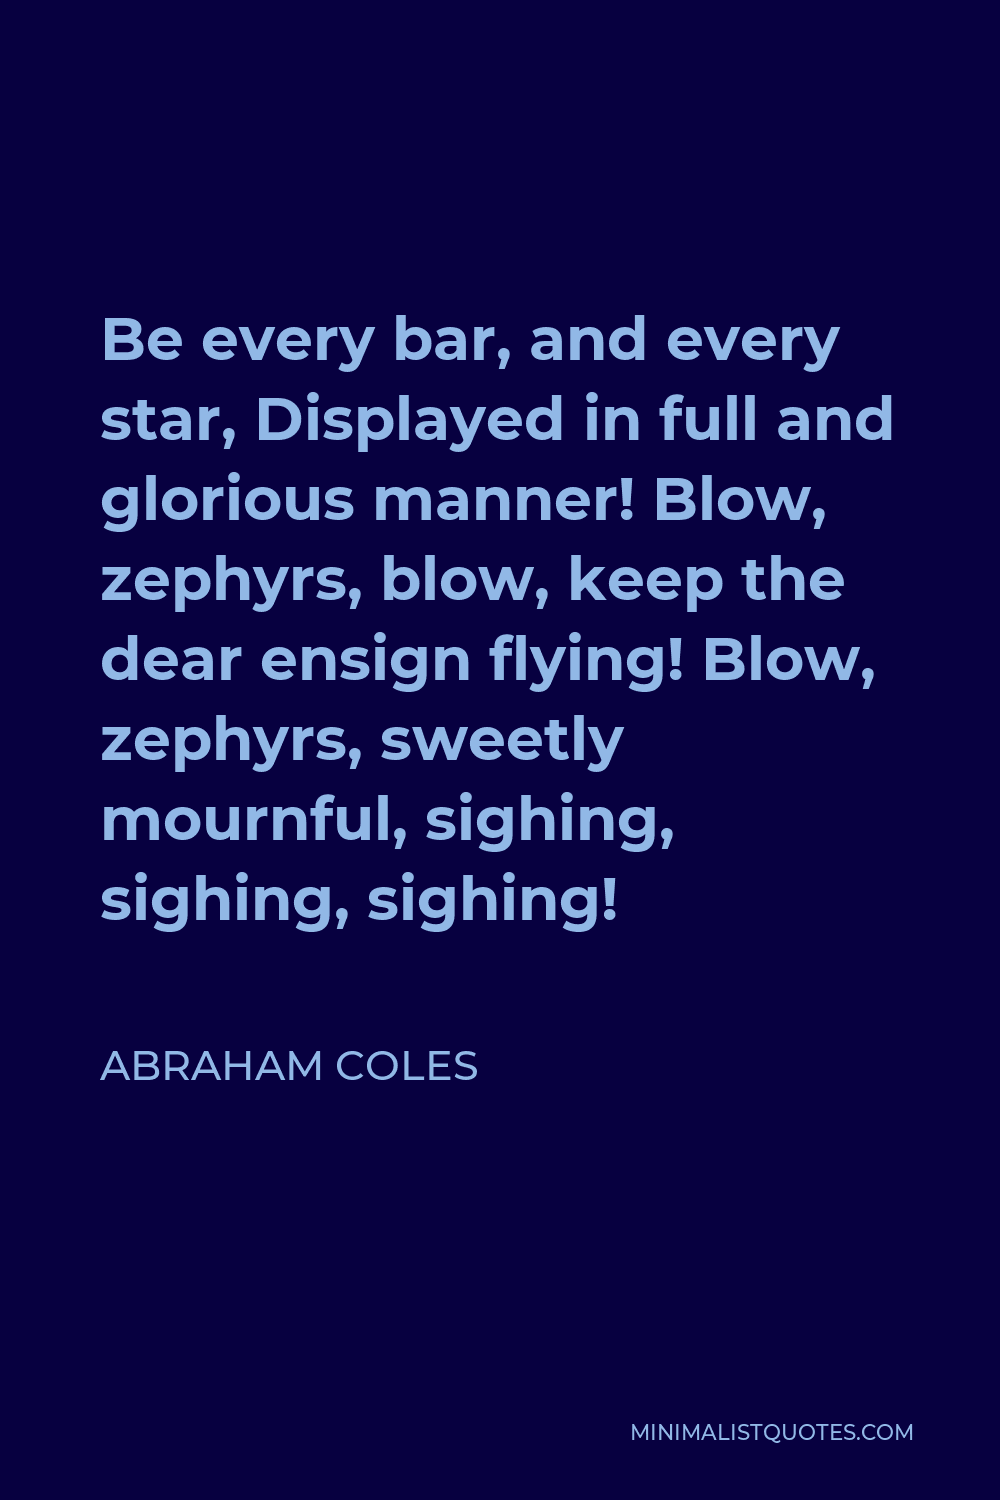 Abraham Coles Quote - Be every bar, and every star, Displayed in full and glorious manner! Blow, zephyrs, blow, keep the dear ensign flying! Blow, zephyrs, sweetly mournful, sighing, sighing, sighing!